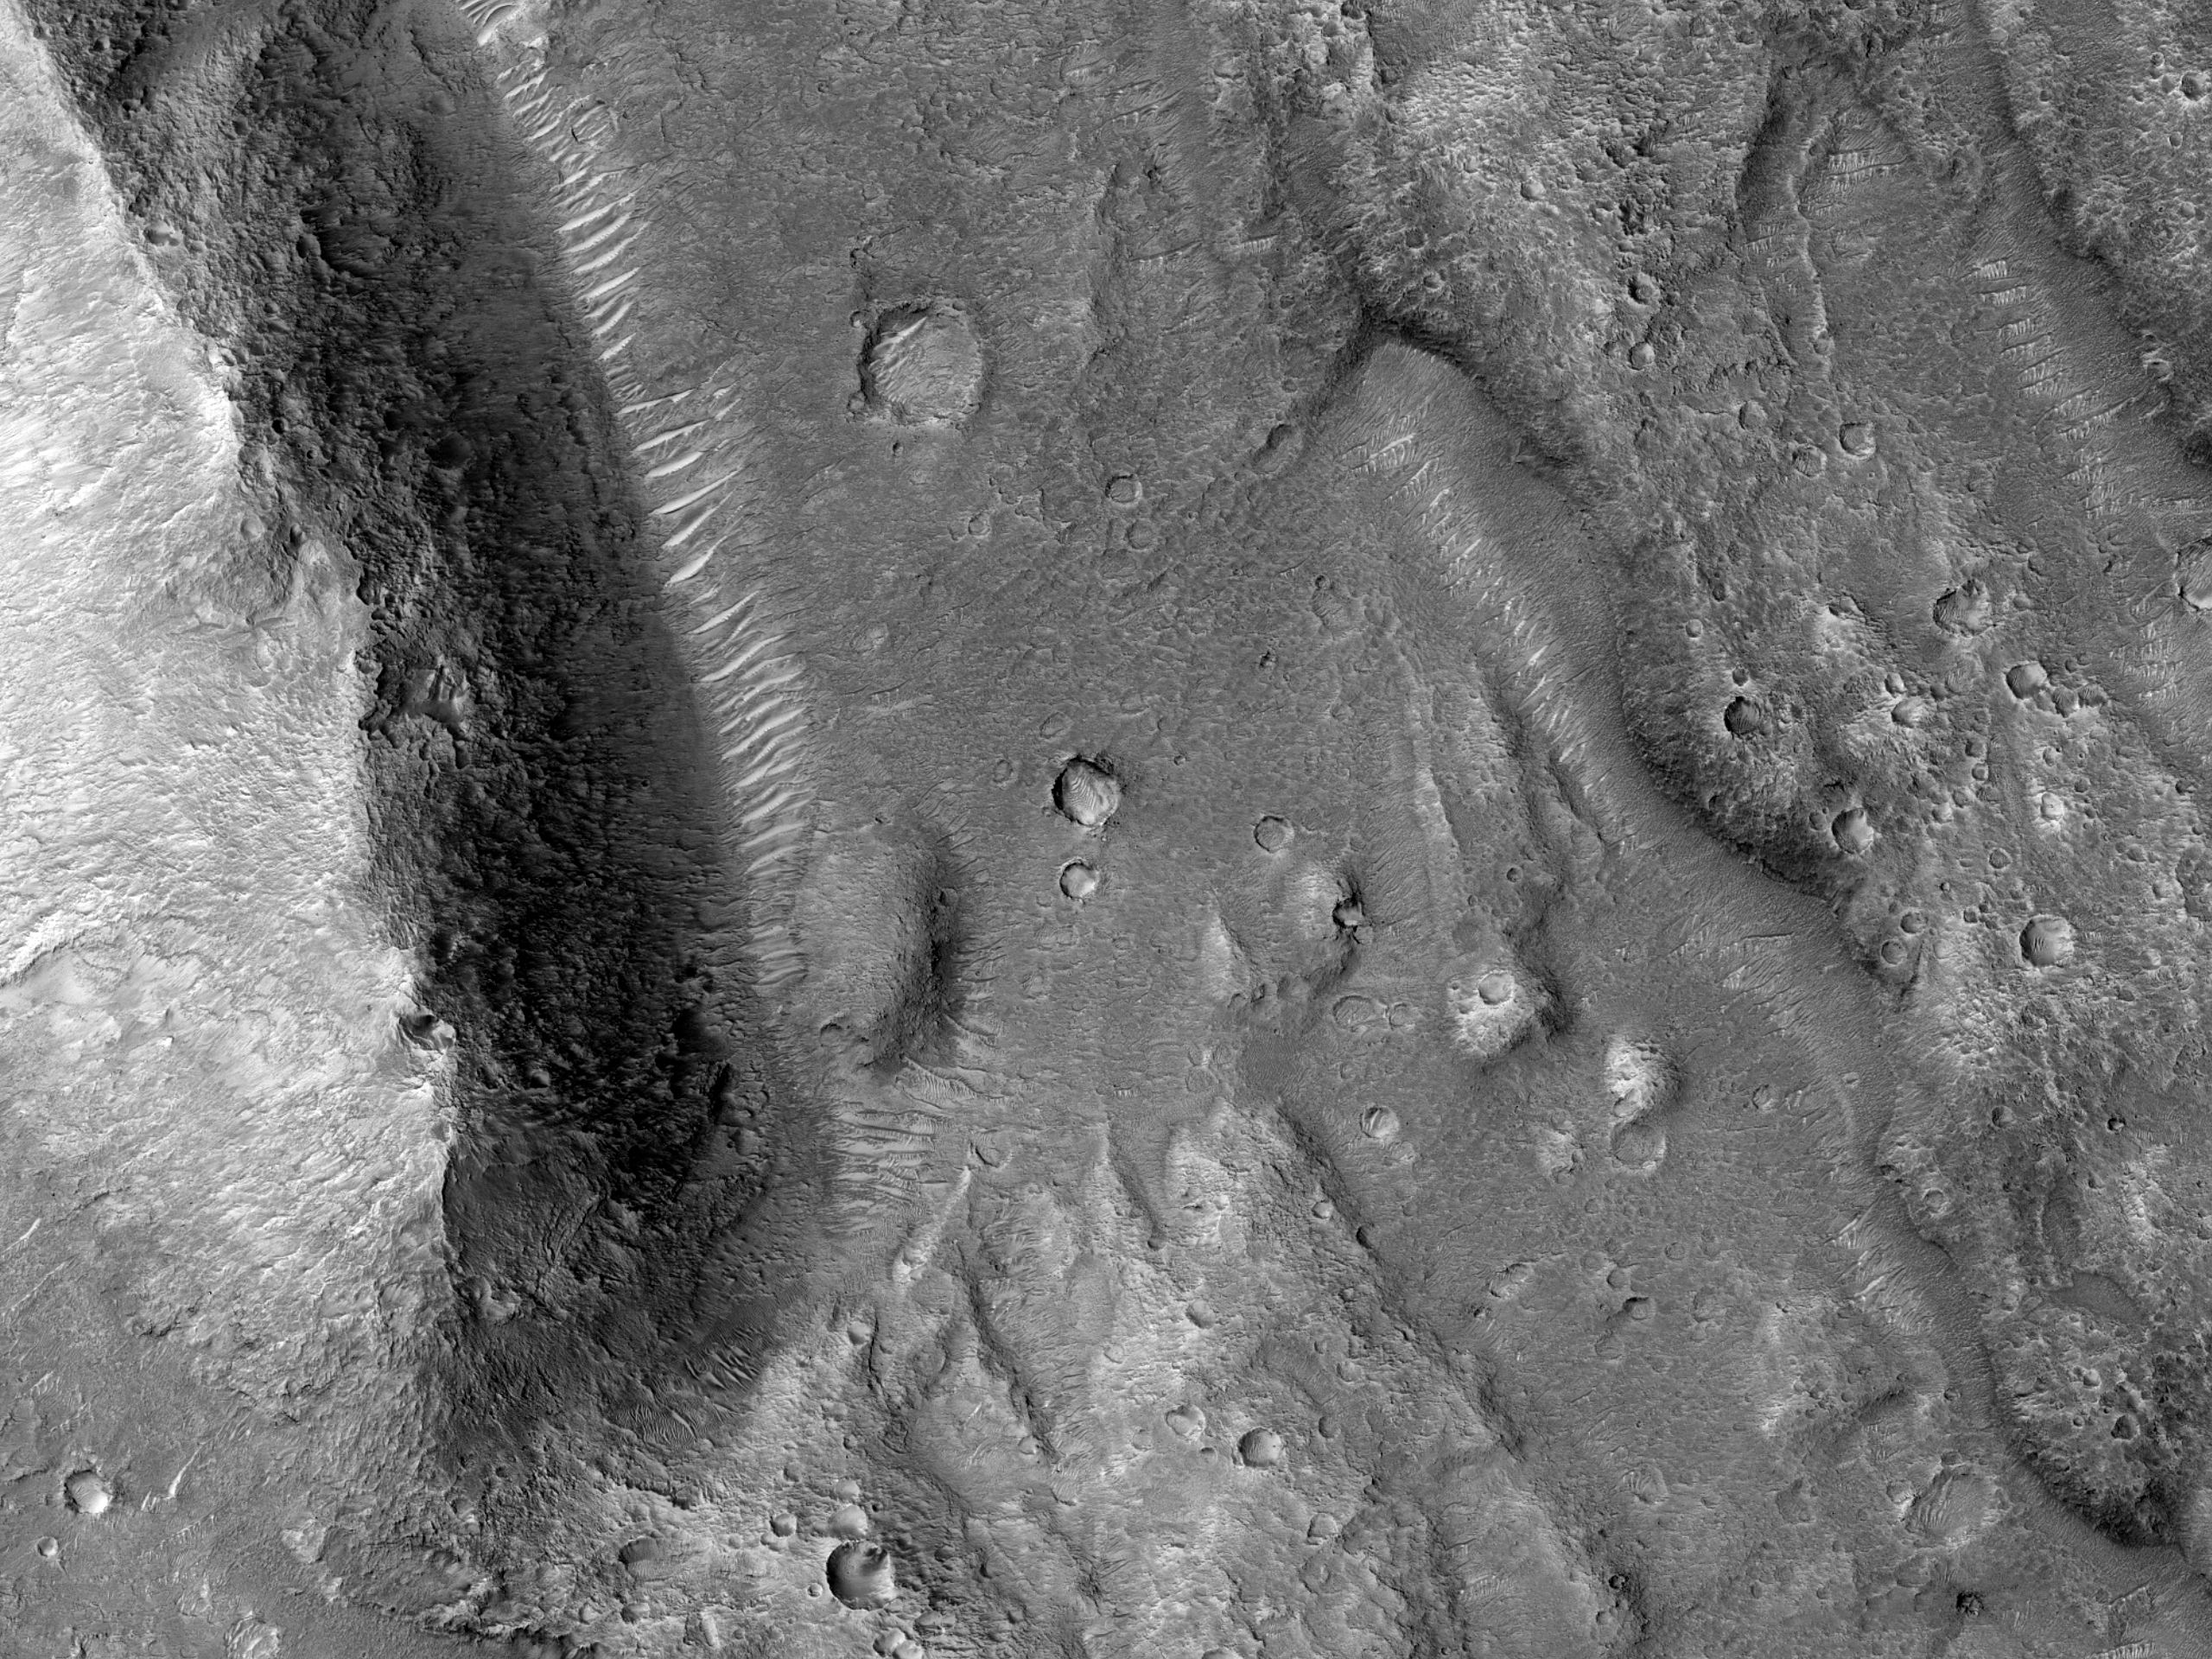 A Valley to the South of Ares Vallis